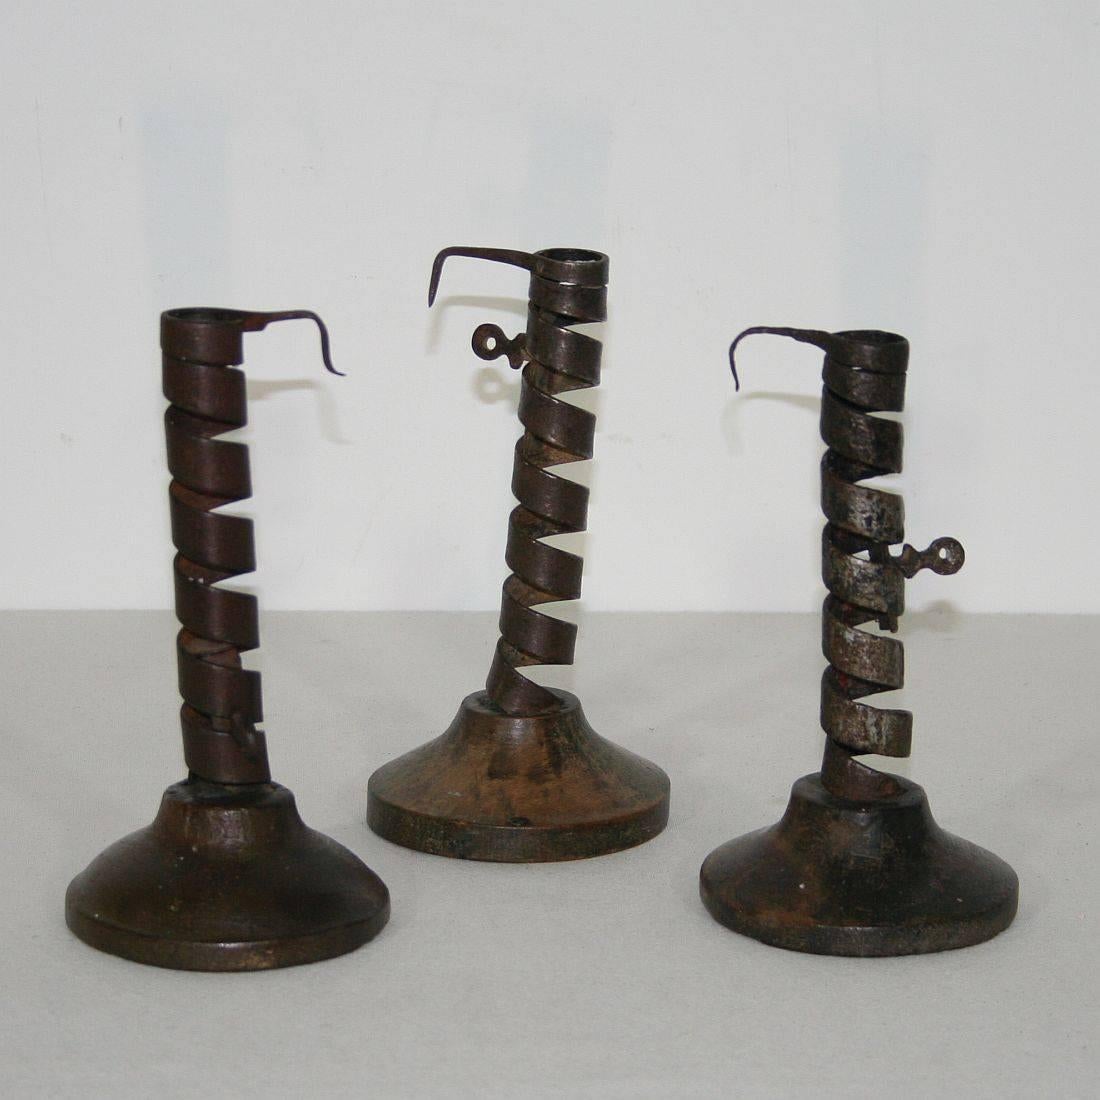 Great collection of three late 18th century French adjustable spiral candlesticks, all on their original simple domed fruit-wood bases, hand-wrought iron, with wonderful delicate detail to the handles. Rat de cave candleholders from Normandy,